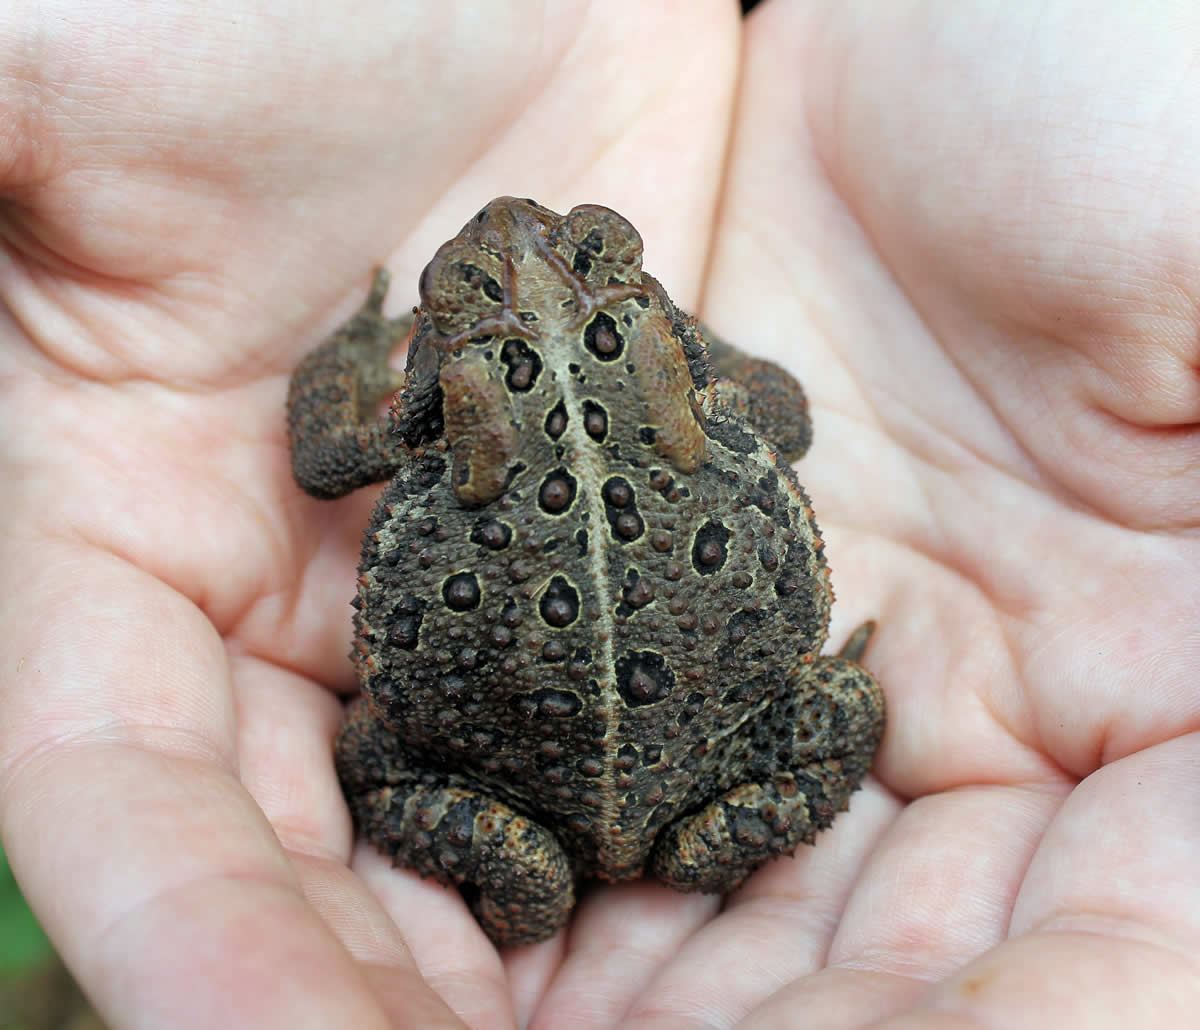 Images of American Toad | 1200x1030